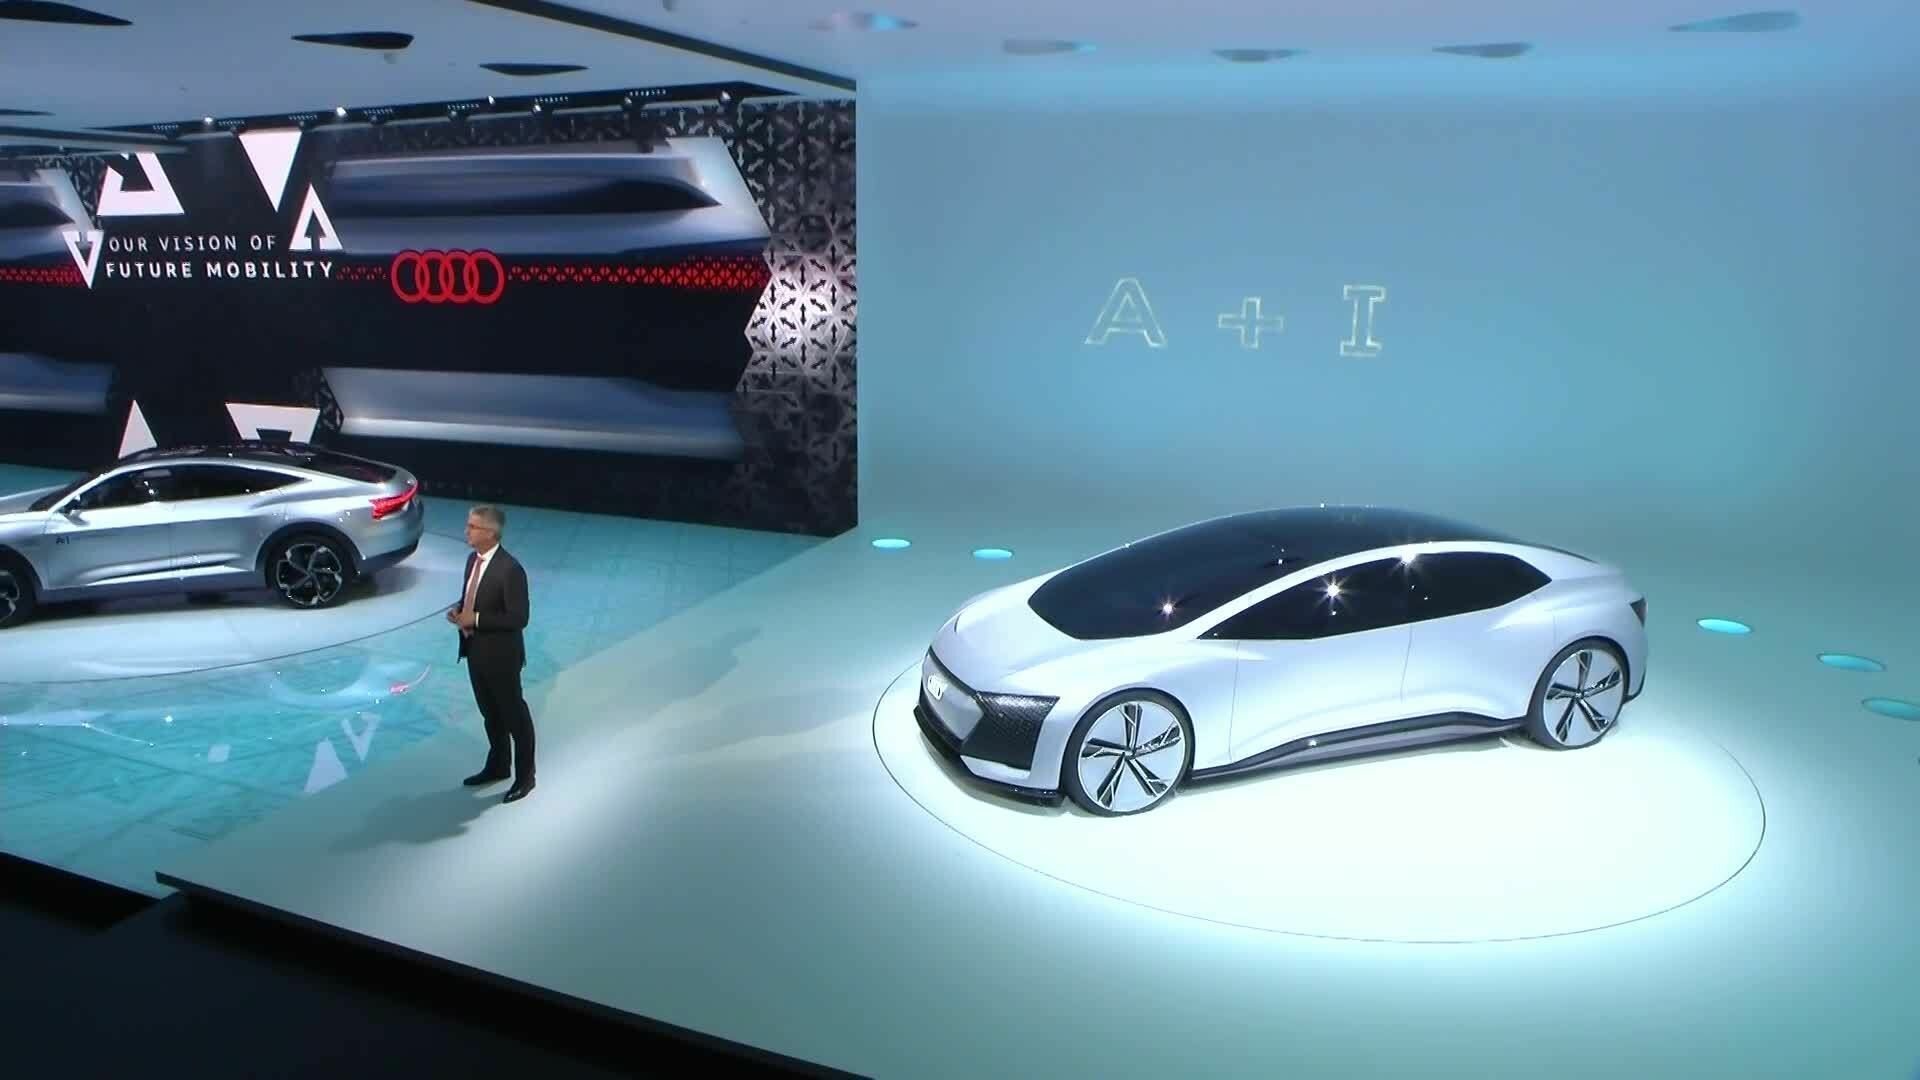 The AUDI AG press conference at IAA